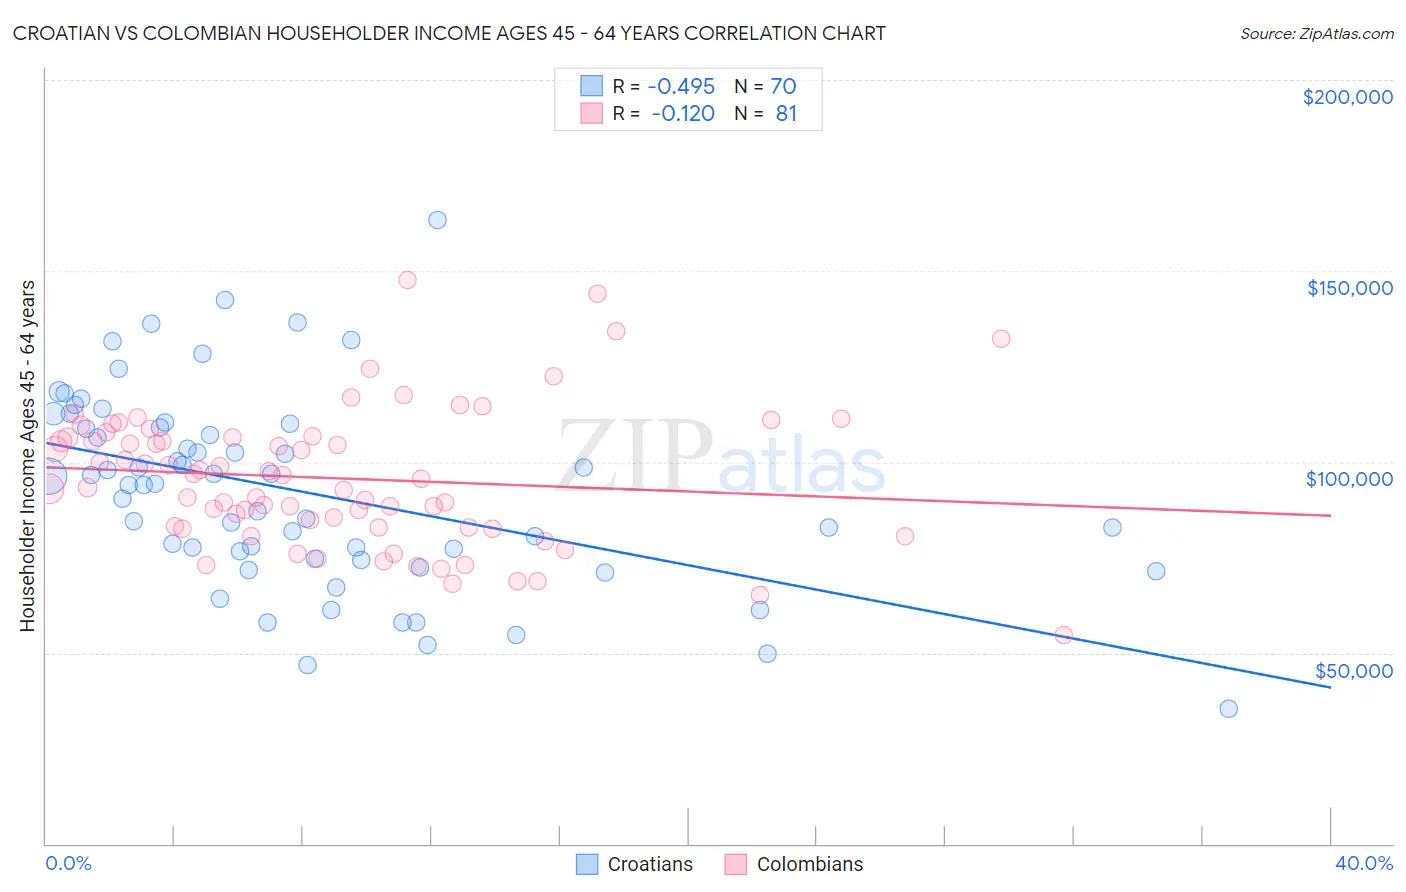 Croatian vs Colombian Householder Income Ages 45 - 64 years